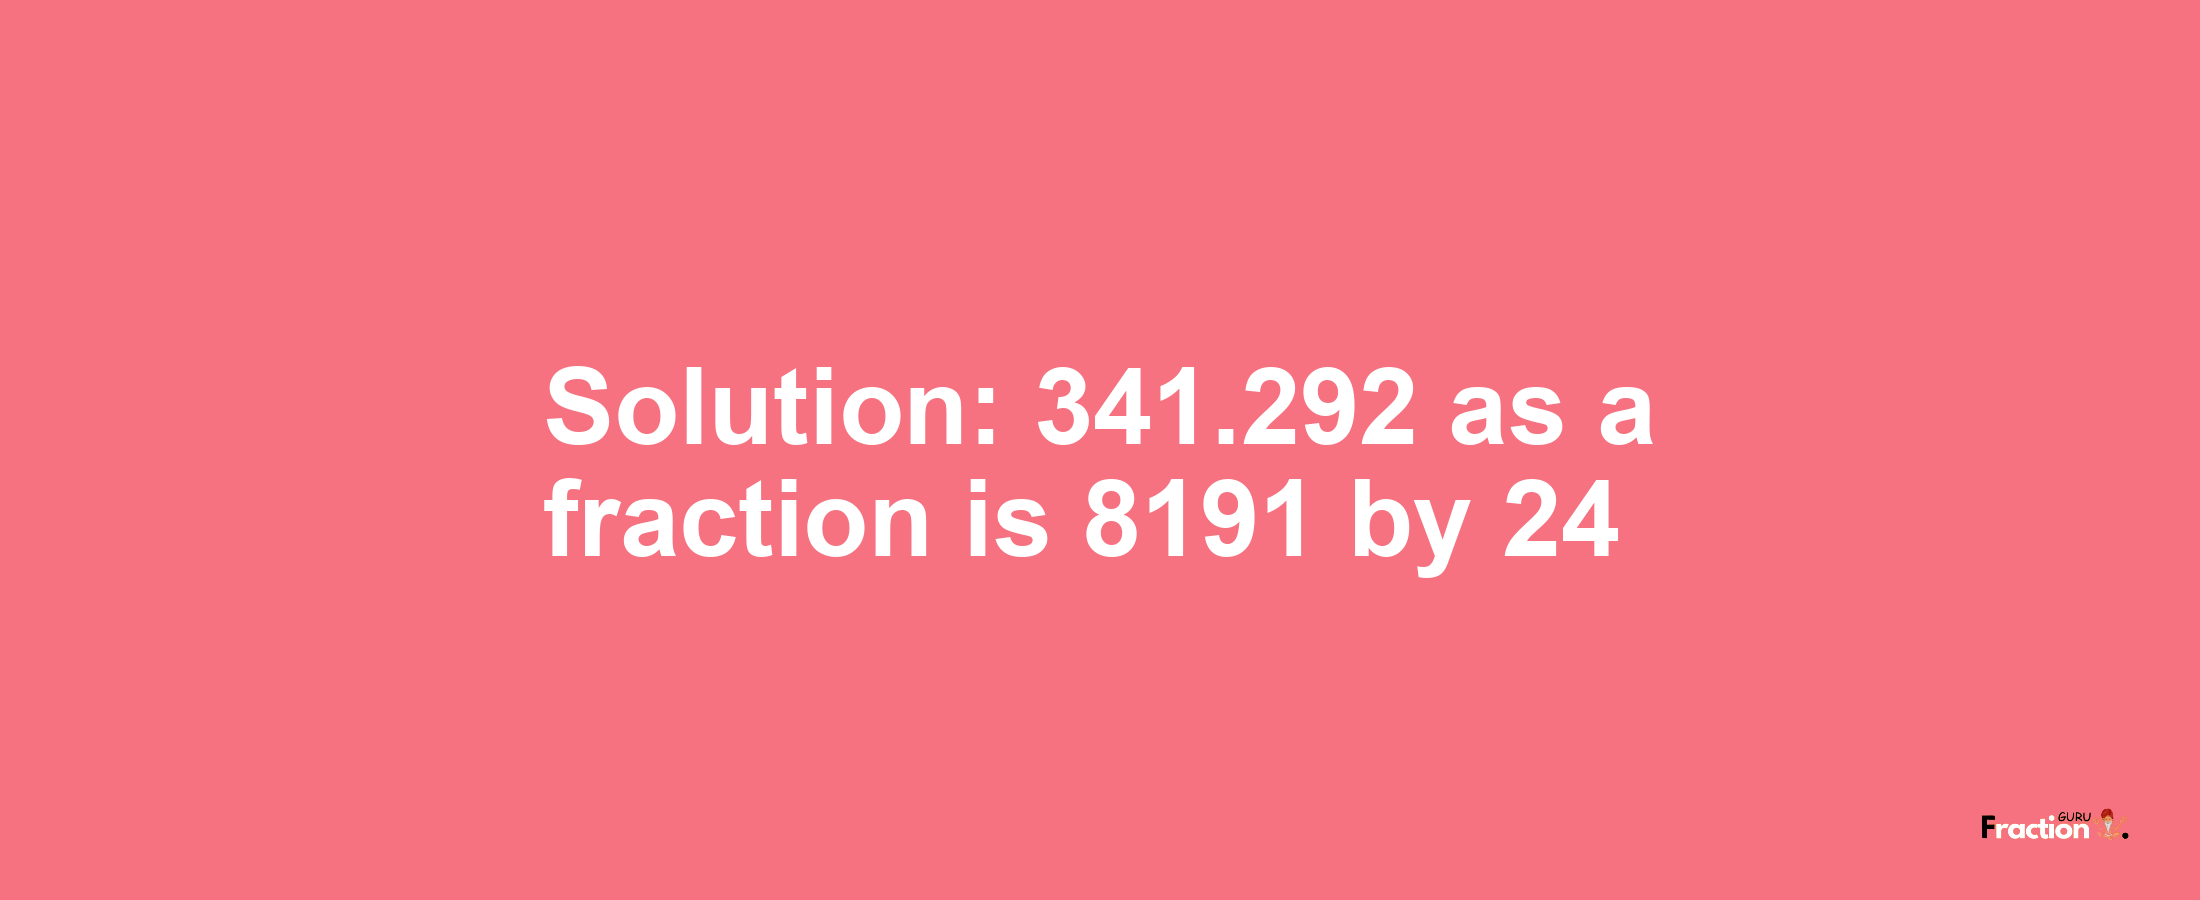 Solution:341.292 as a fraction is 8191/24